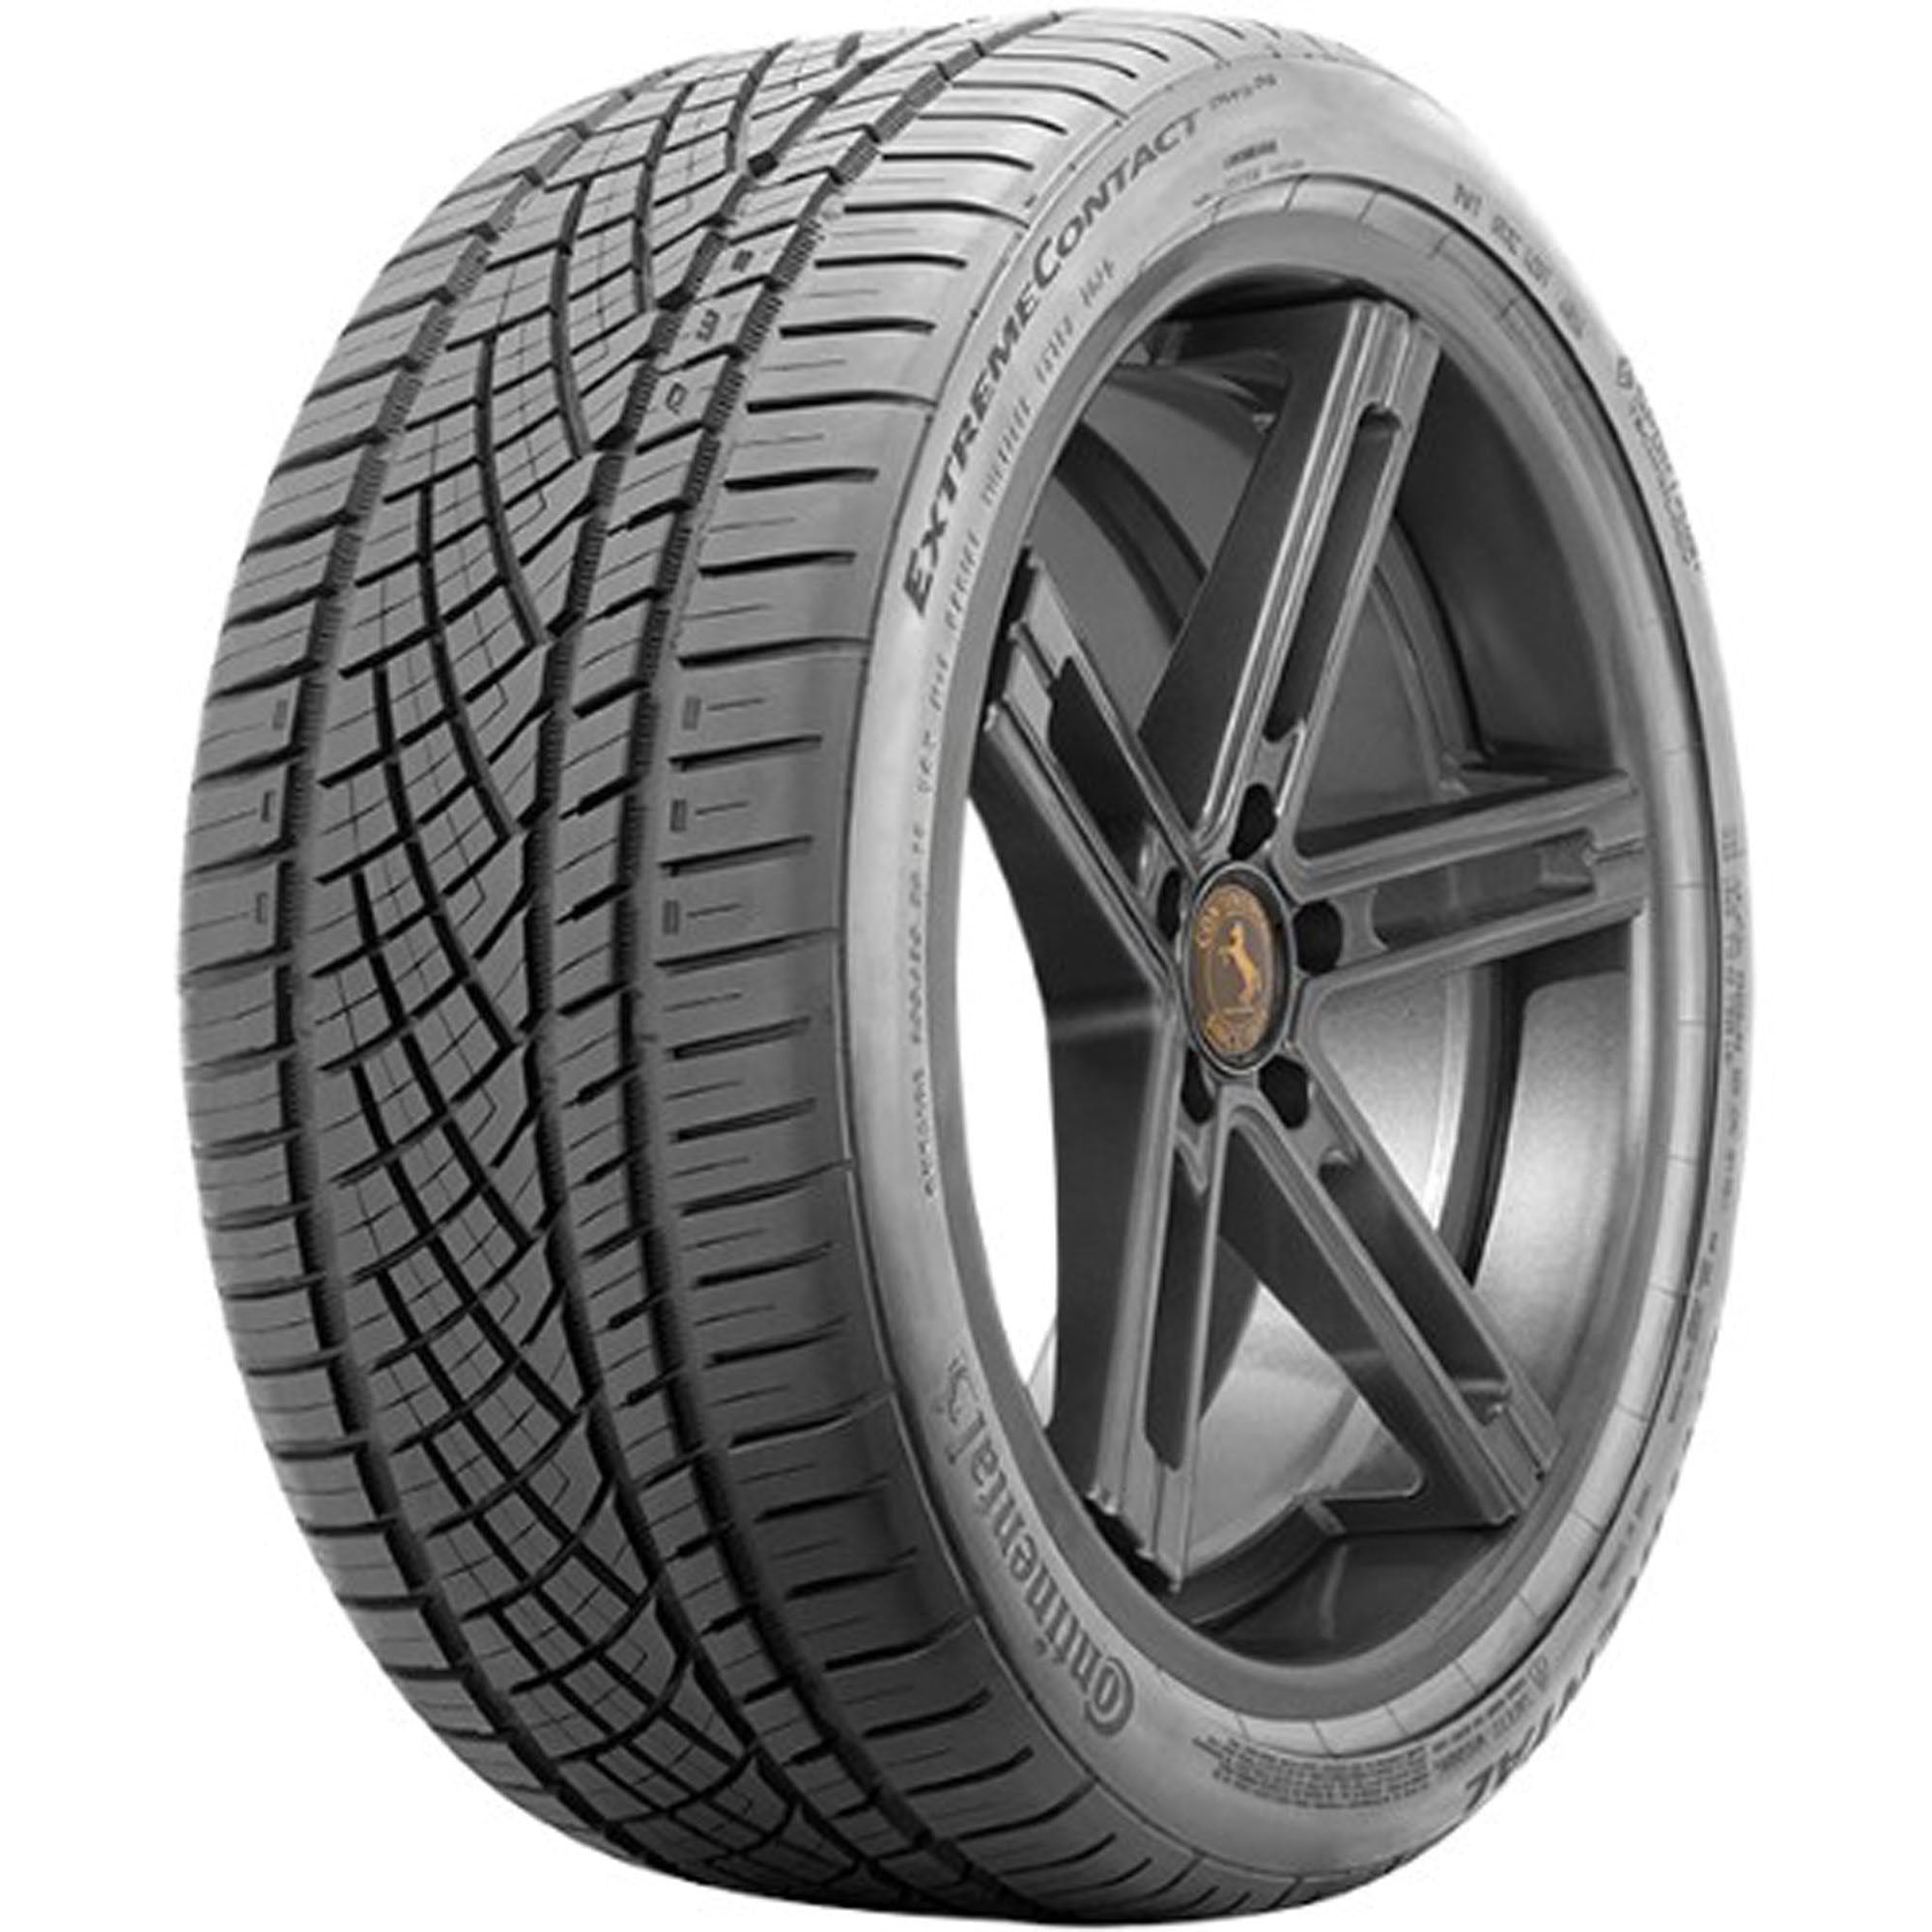 Continental ExtremeContact DWS06 All Season 245/35ZR20 95Y XL Passenger Tire